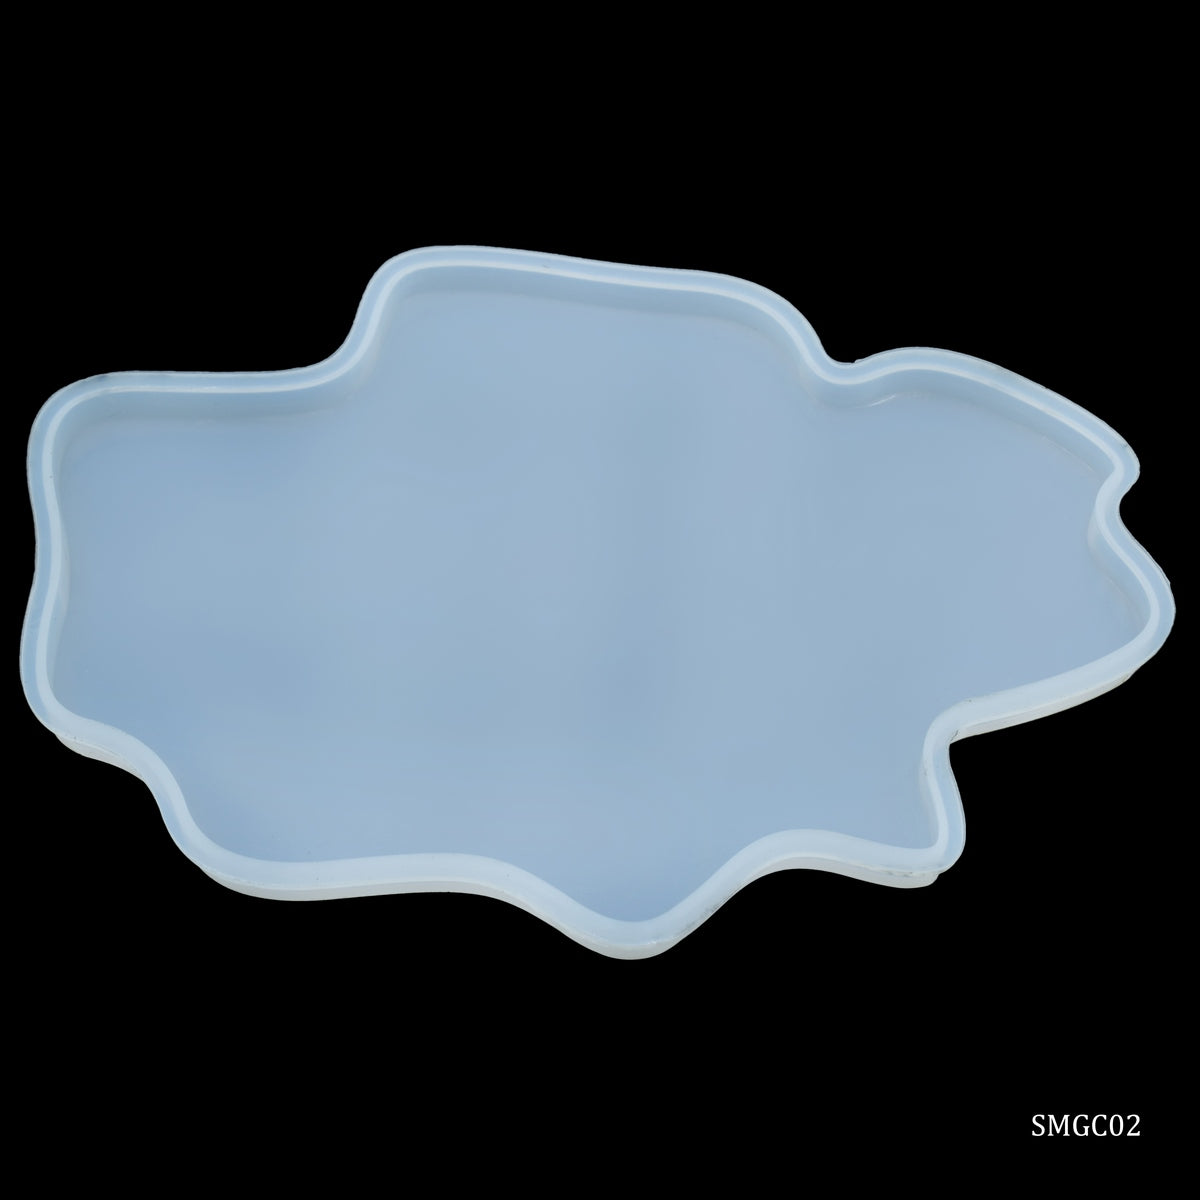 jags-mumbai Mould Silicone Mould Geode Coasters Small SMGC02